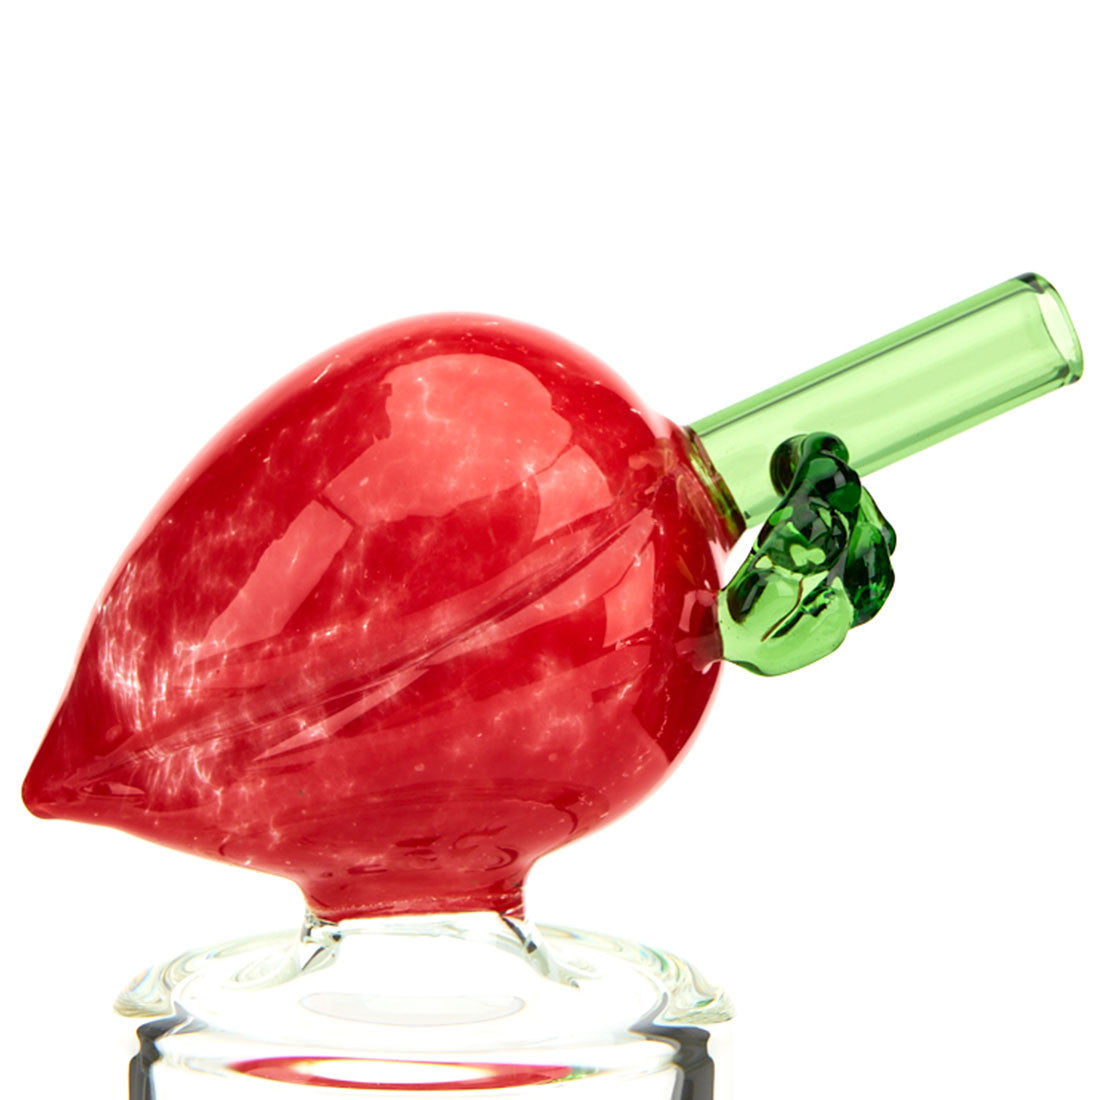 MOB Glass Strawberry Bubbler with Red Glass Strawberry on Top and on Perc